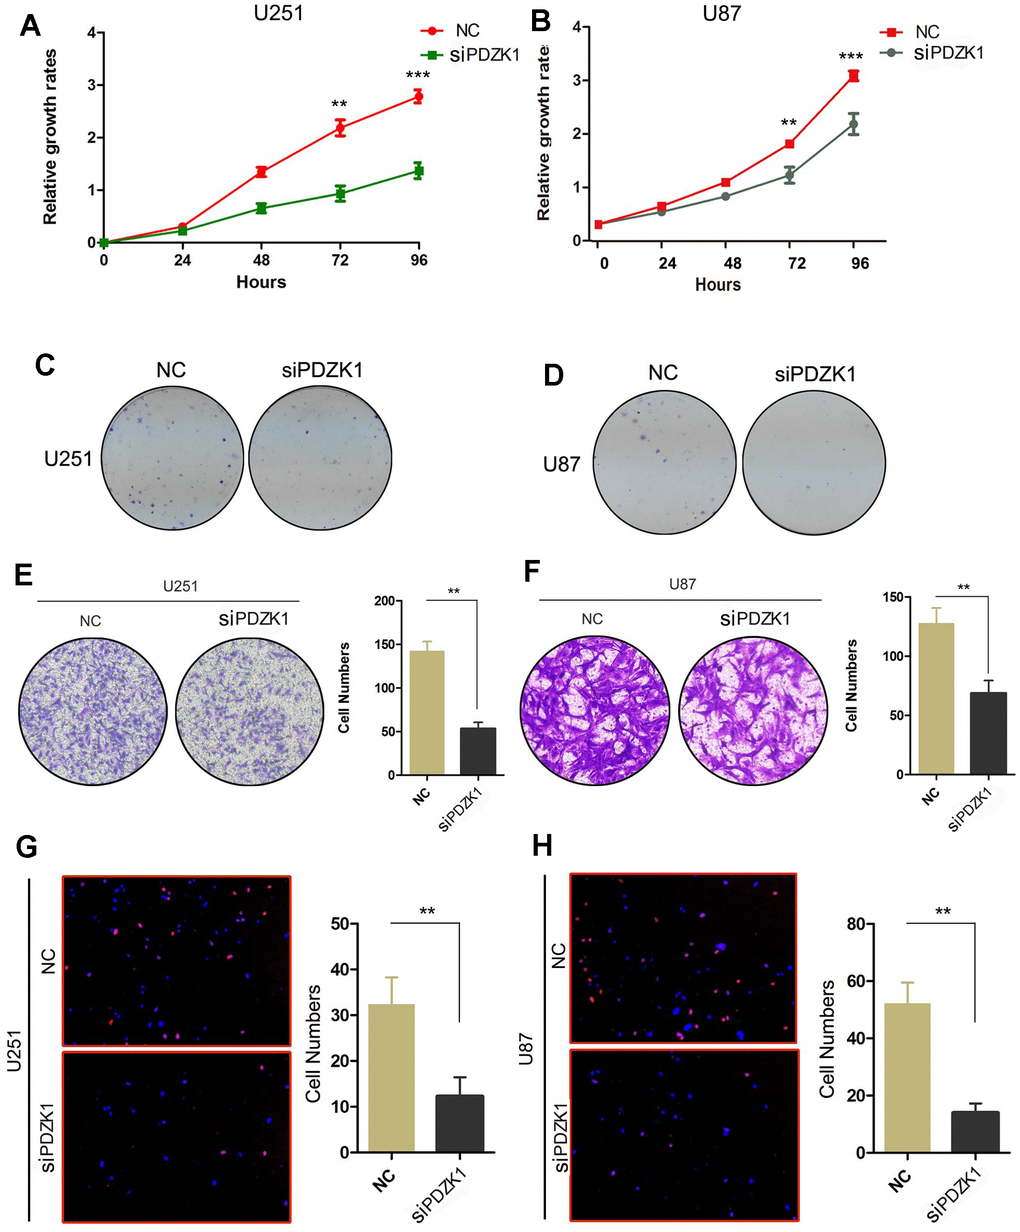 PDZK1 knockdown inhibits the proliferation and invasion of glioma cells. (A, B) The effect of PDZK1 knockdown on U251 and U87 cell proliferation was assessed by the CCK-8 cell growth assay. ***P C, D) The effect of PDZK1 knockdown on U251 and U87 cell proliferation was assessed by a colony formation assay. (E, F) Transwell assays were used to detect the inhibitory effect of PDZK1 knockdown on invasion in U251 and U87 cells. **P G, H) Knockdown of PDZK1 inhibited DNA replication in U251 and U87 cells, as determined by EdU staining. **P 